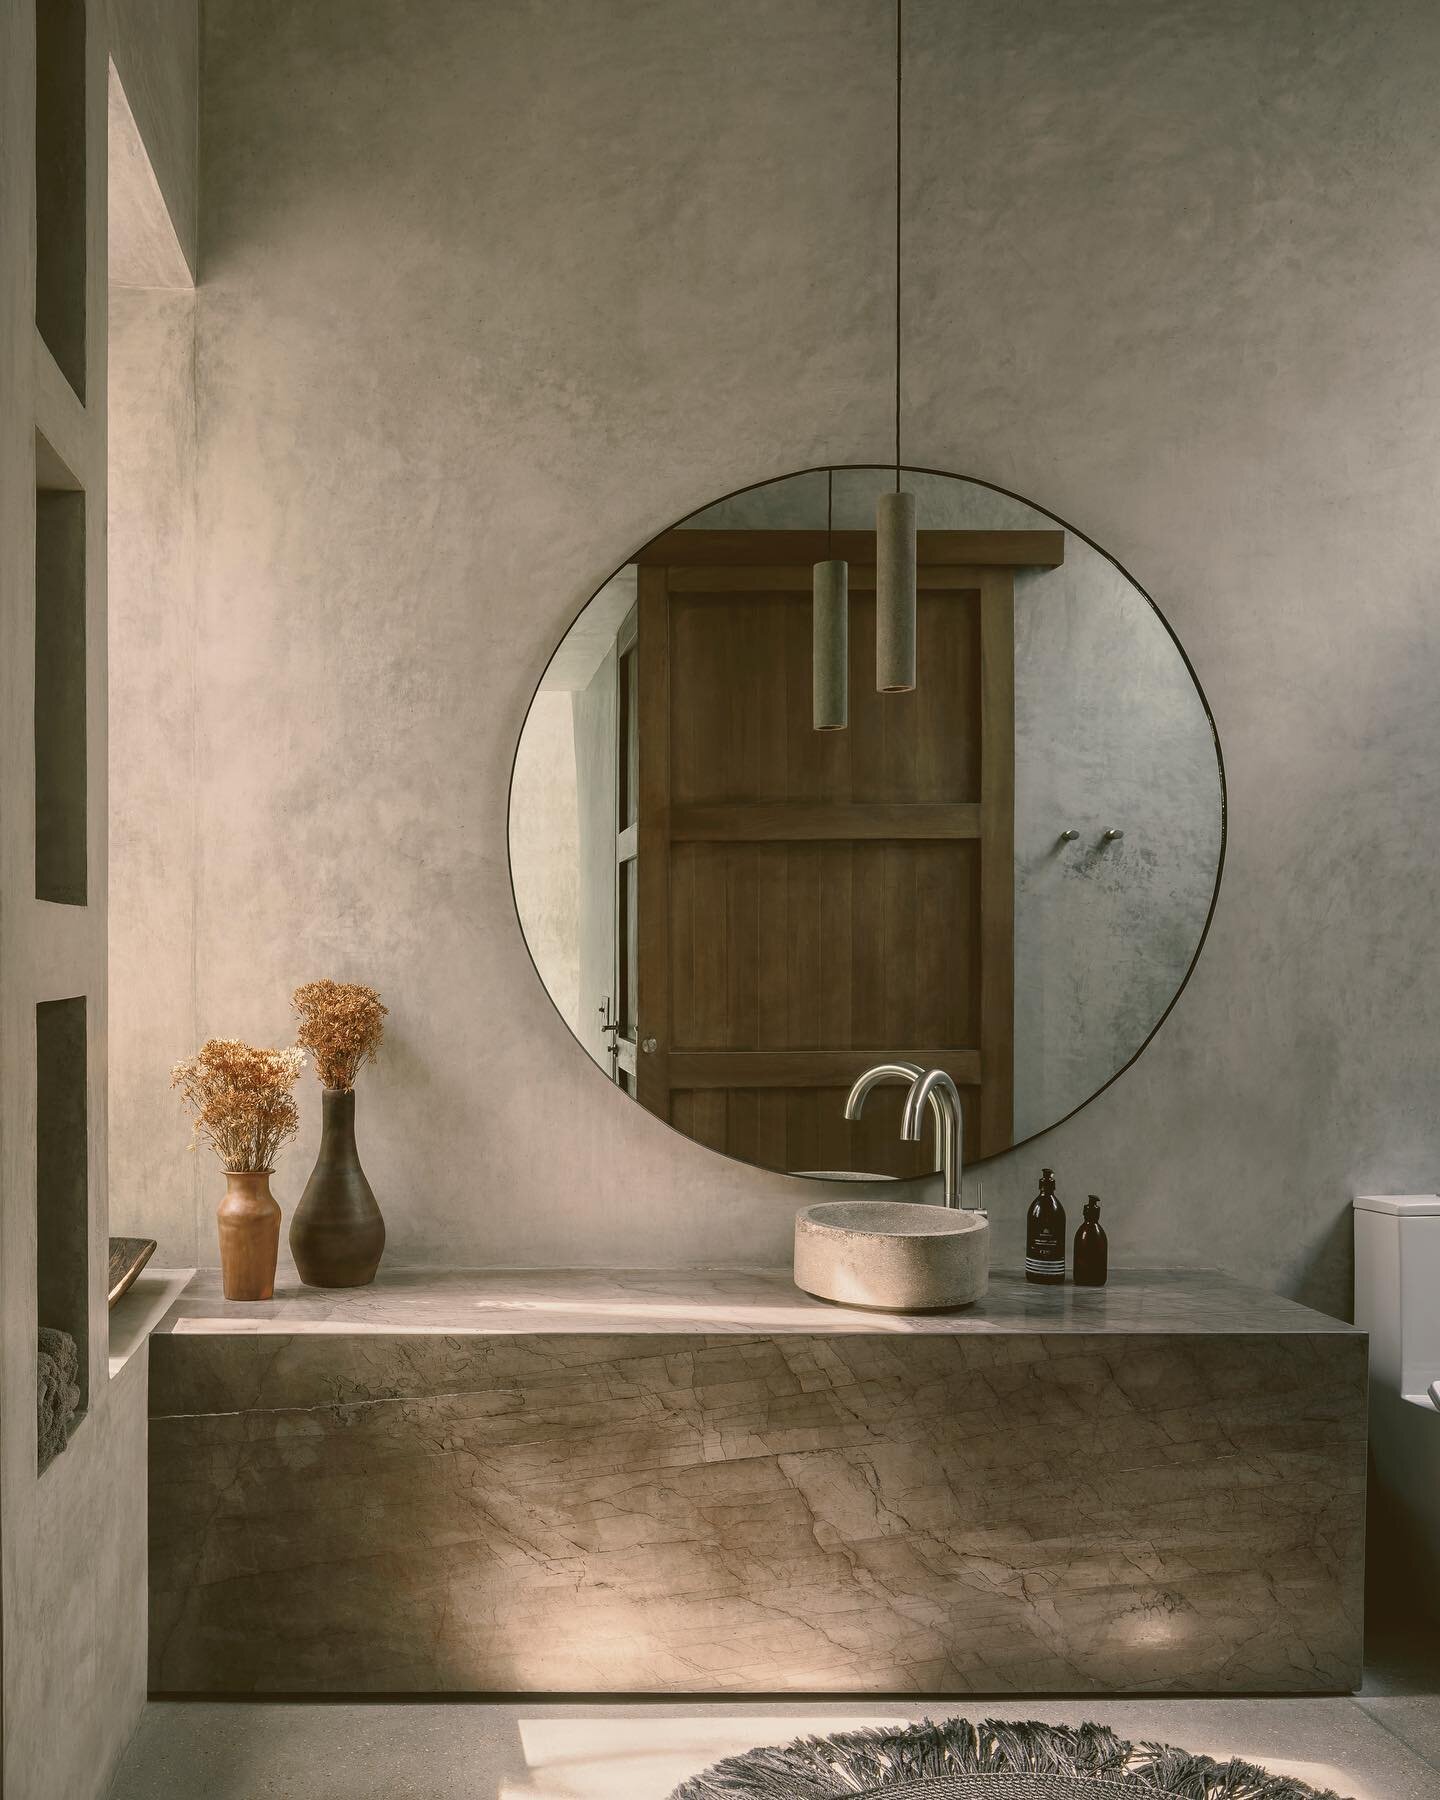 Our polished cement walls, terrazzo floors and marble counter tops are carefully handcrafted together to render timeless, seamless beauty. 
@villapetricor design build by @colab_tulum
Photography by @cesarbejarstudio 
.
.
. 
.
.
.
.
.
.
.
#architectu